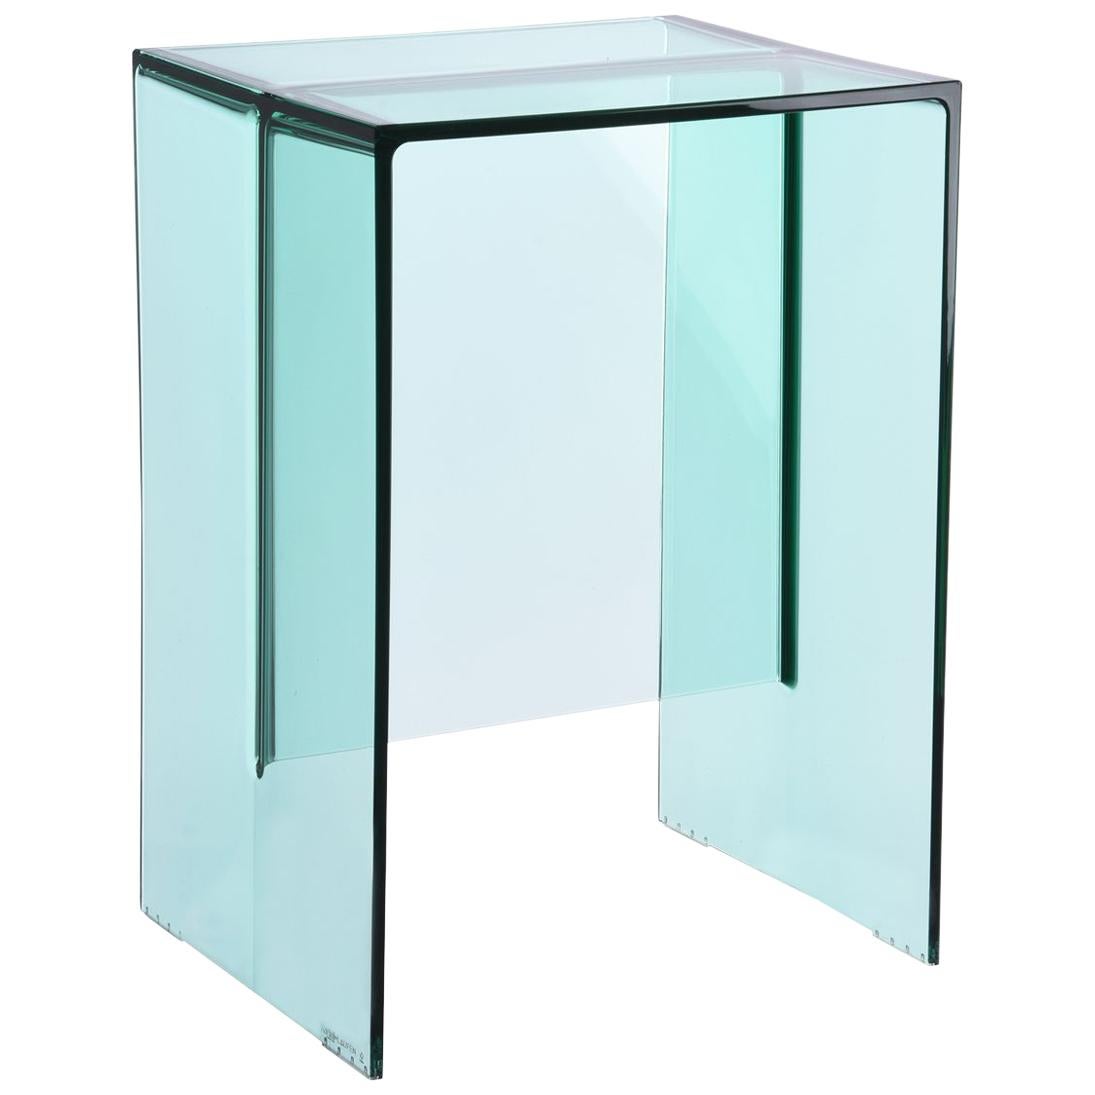 Kartell Max-Beam Side Table in Aquamarine by Ludovica and Roberto Palomba